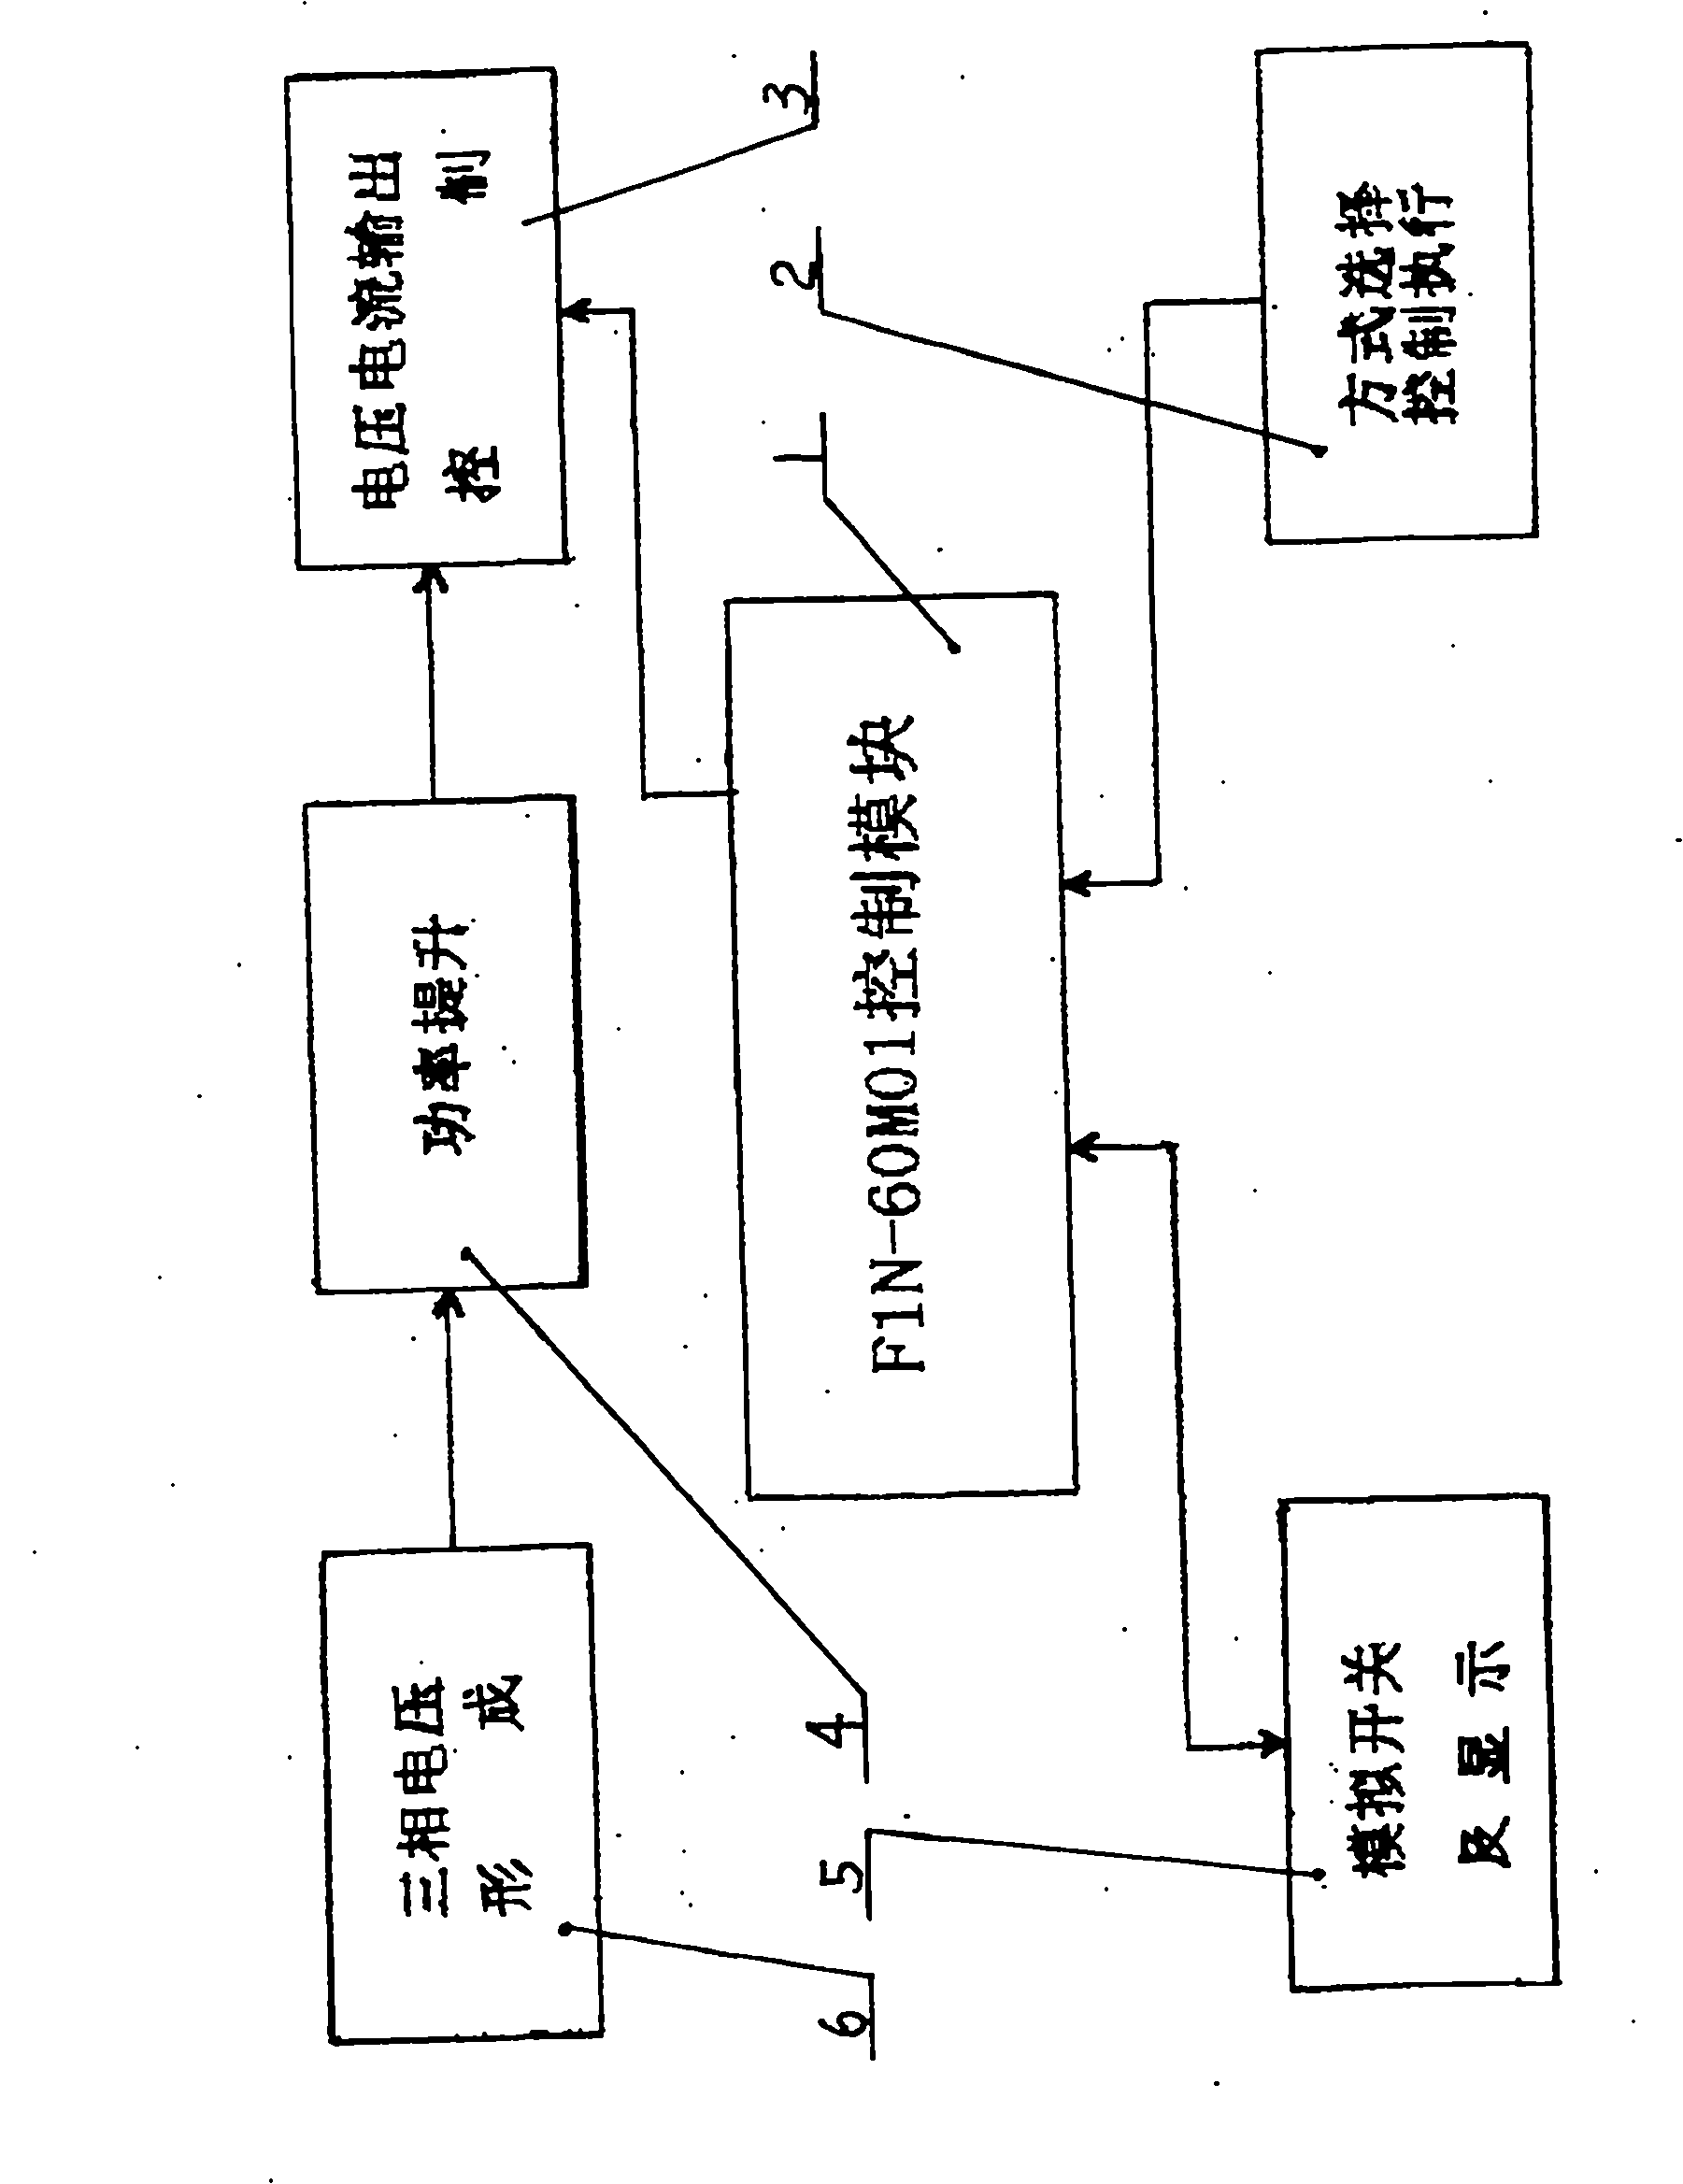 Experimental instrument for automatic switching device of standby power supply